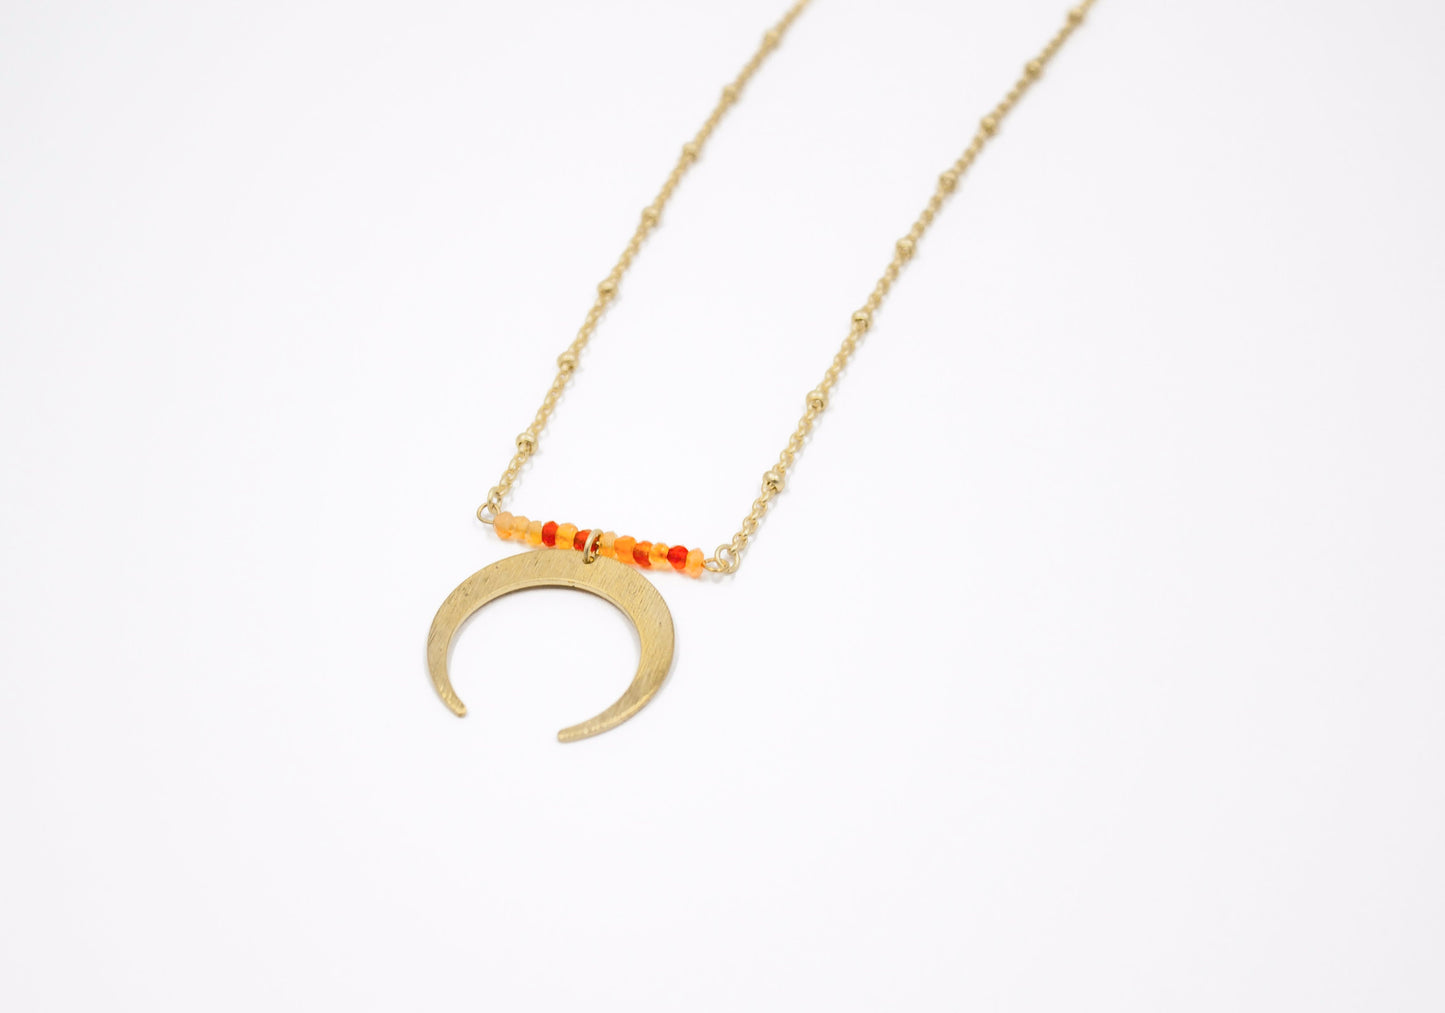 Shades of Citrine + Crescent Moon Necklace